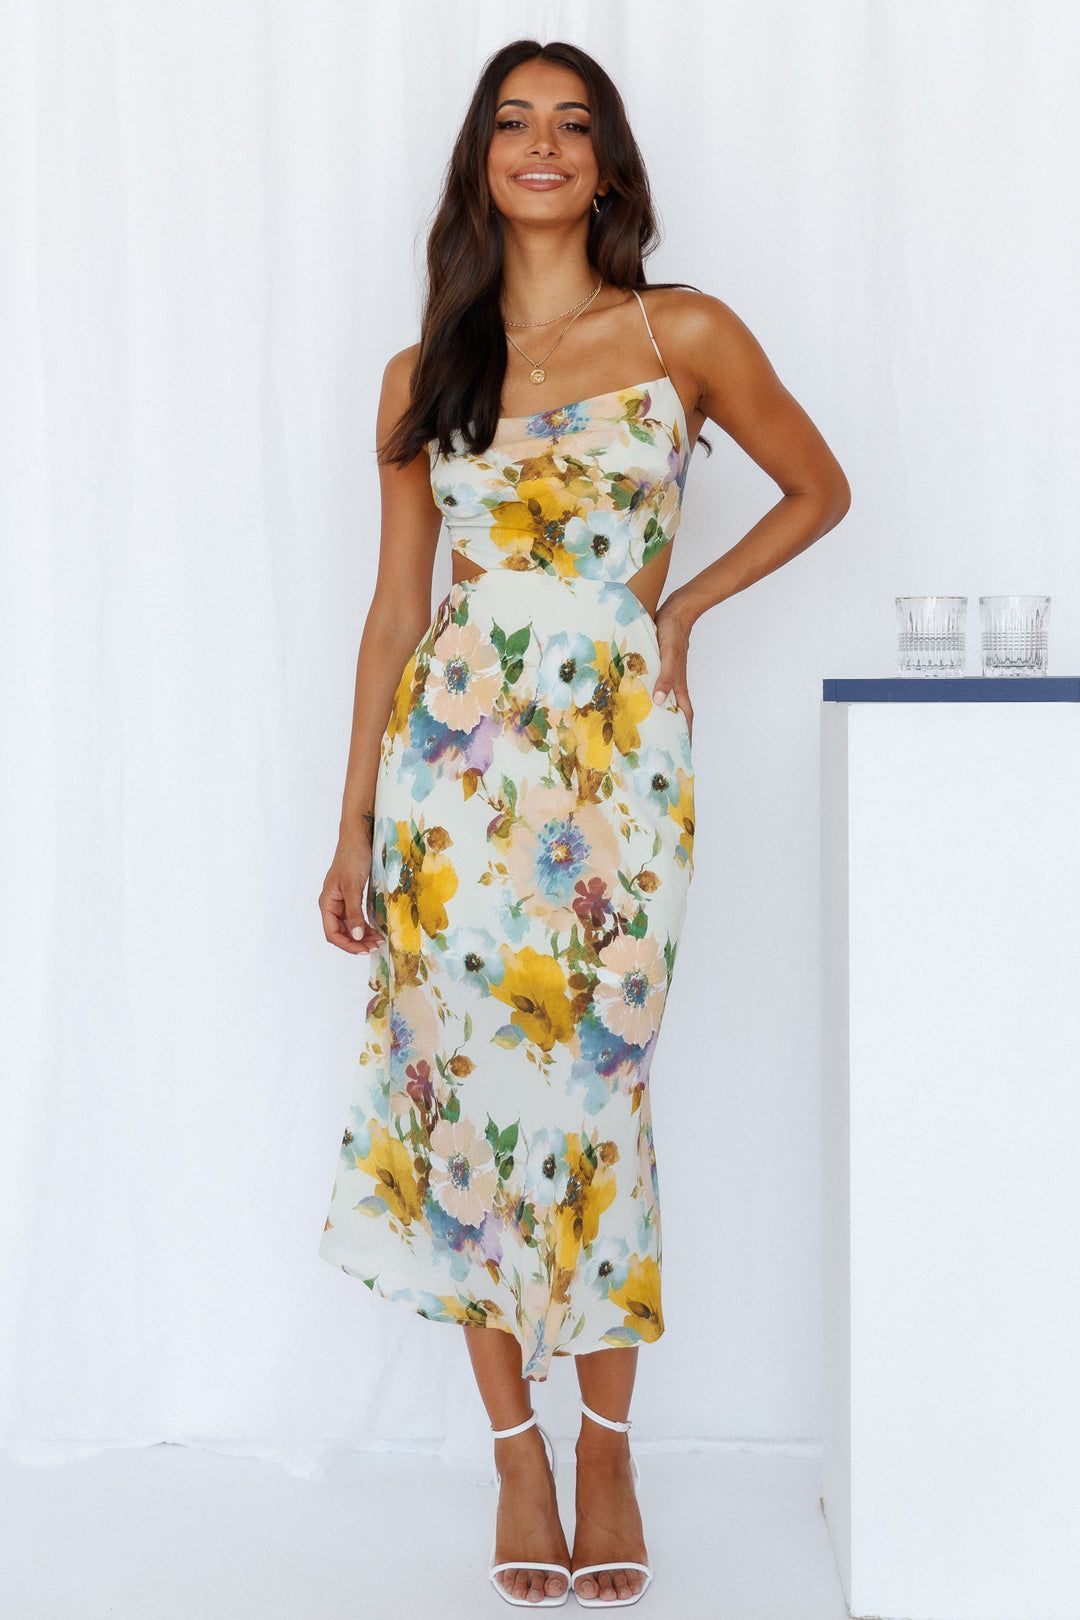 Cute & Casual Floral Dresses this Summer 2023: Maxi, Long & Midi, Short Outfits for Street Styles